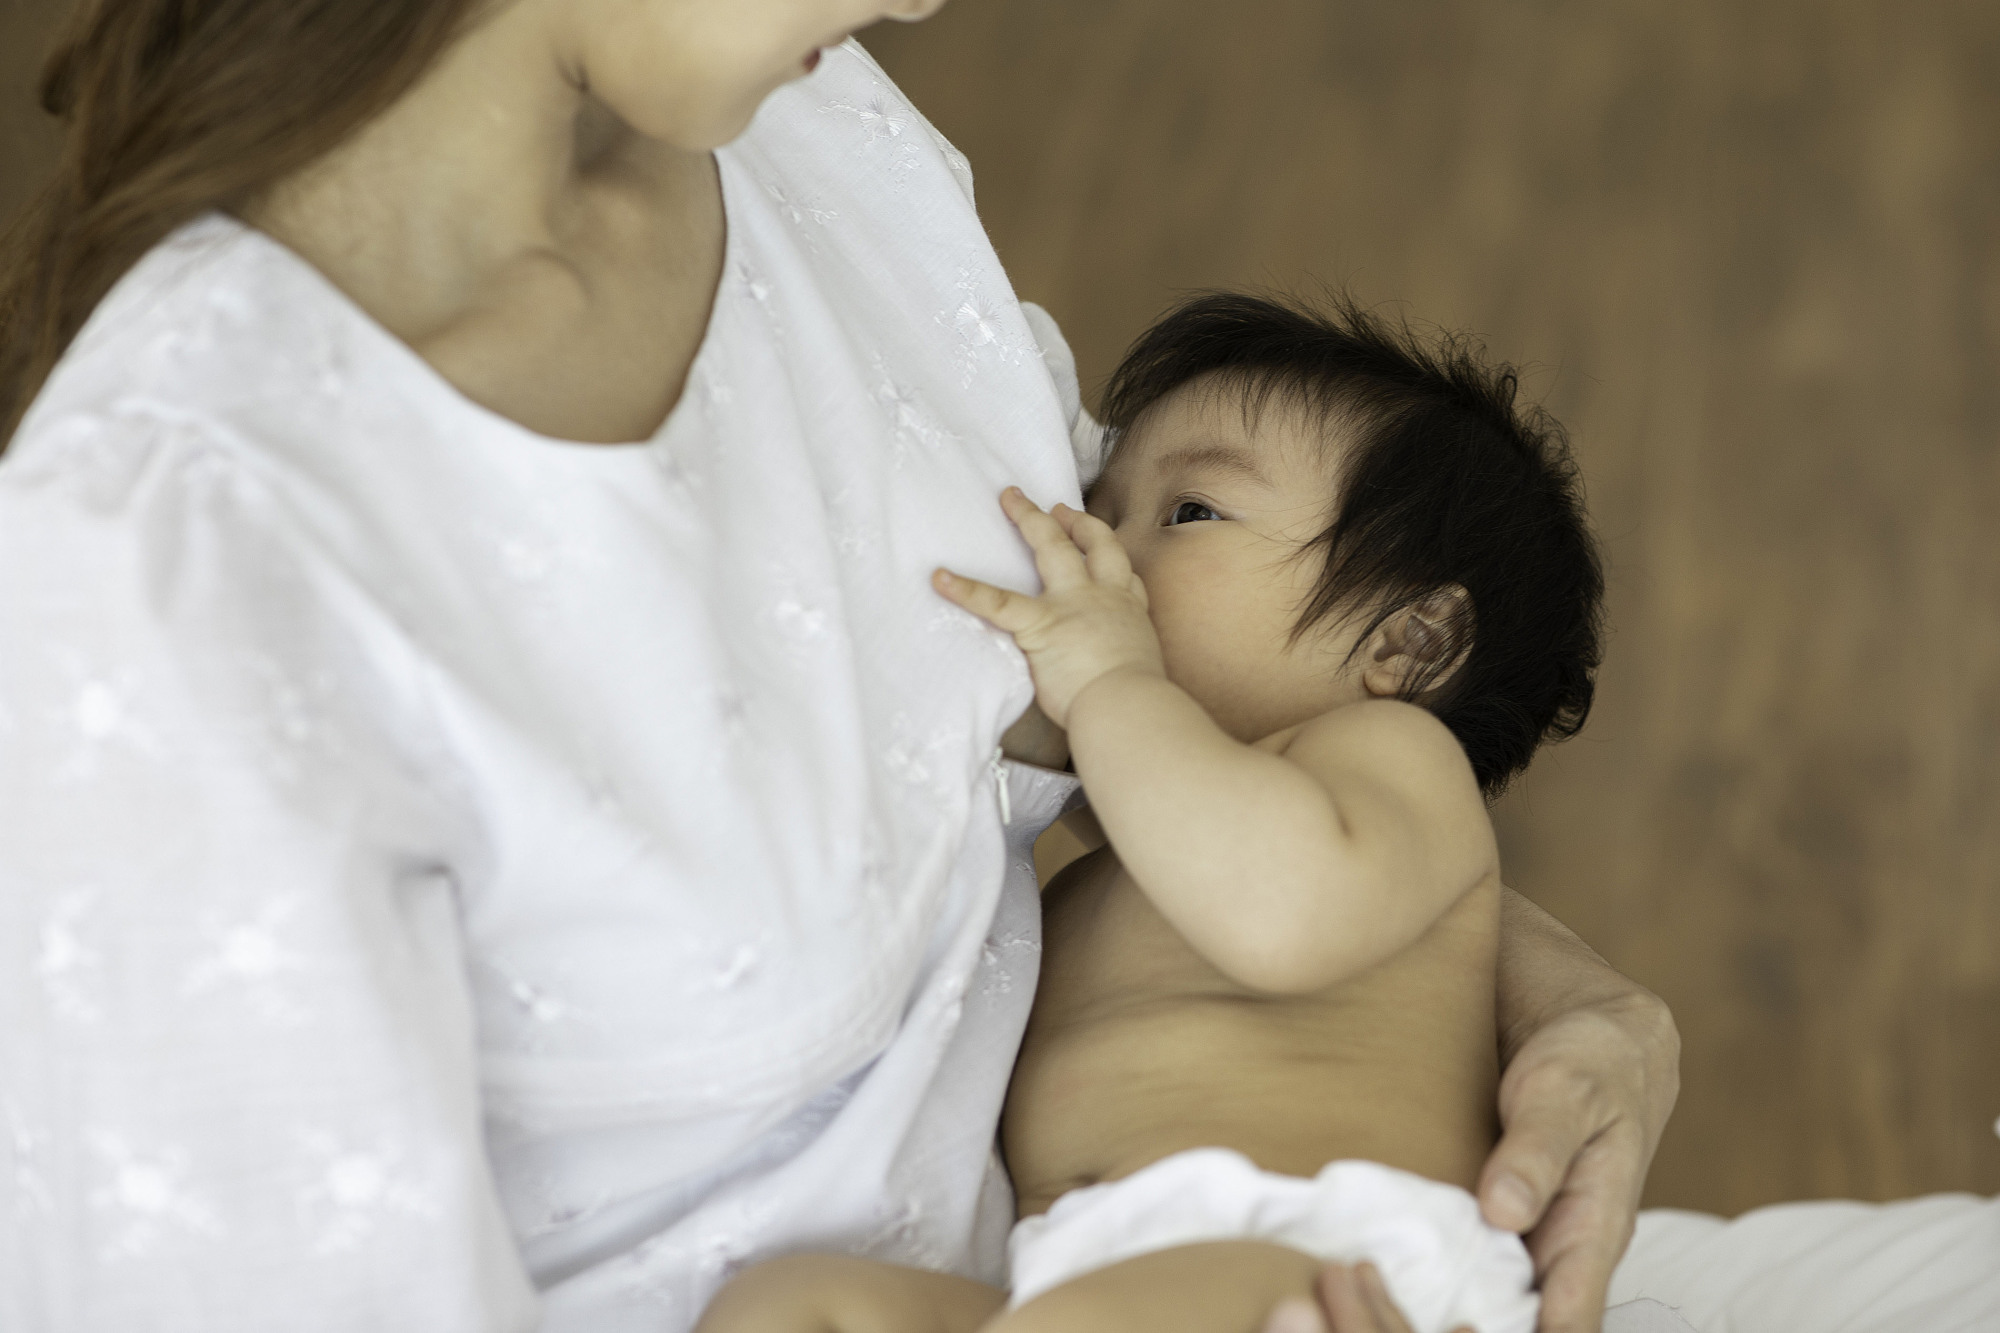 'Lactivist' Midori Ogino says successful breast-feeding isn't a matter of luck but rather the product of practical knowledge and social support. | GETTY IMAGES